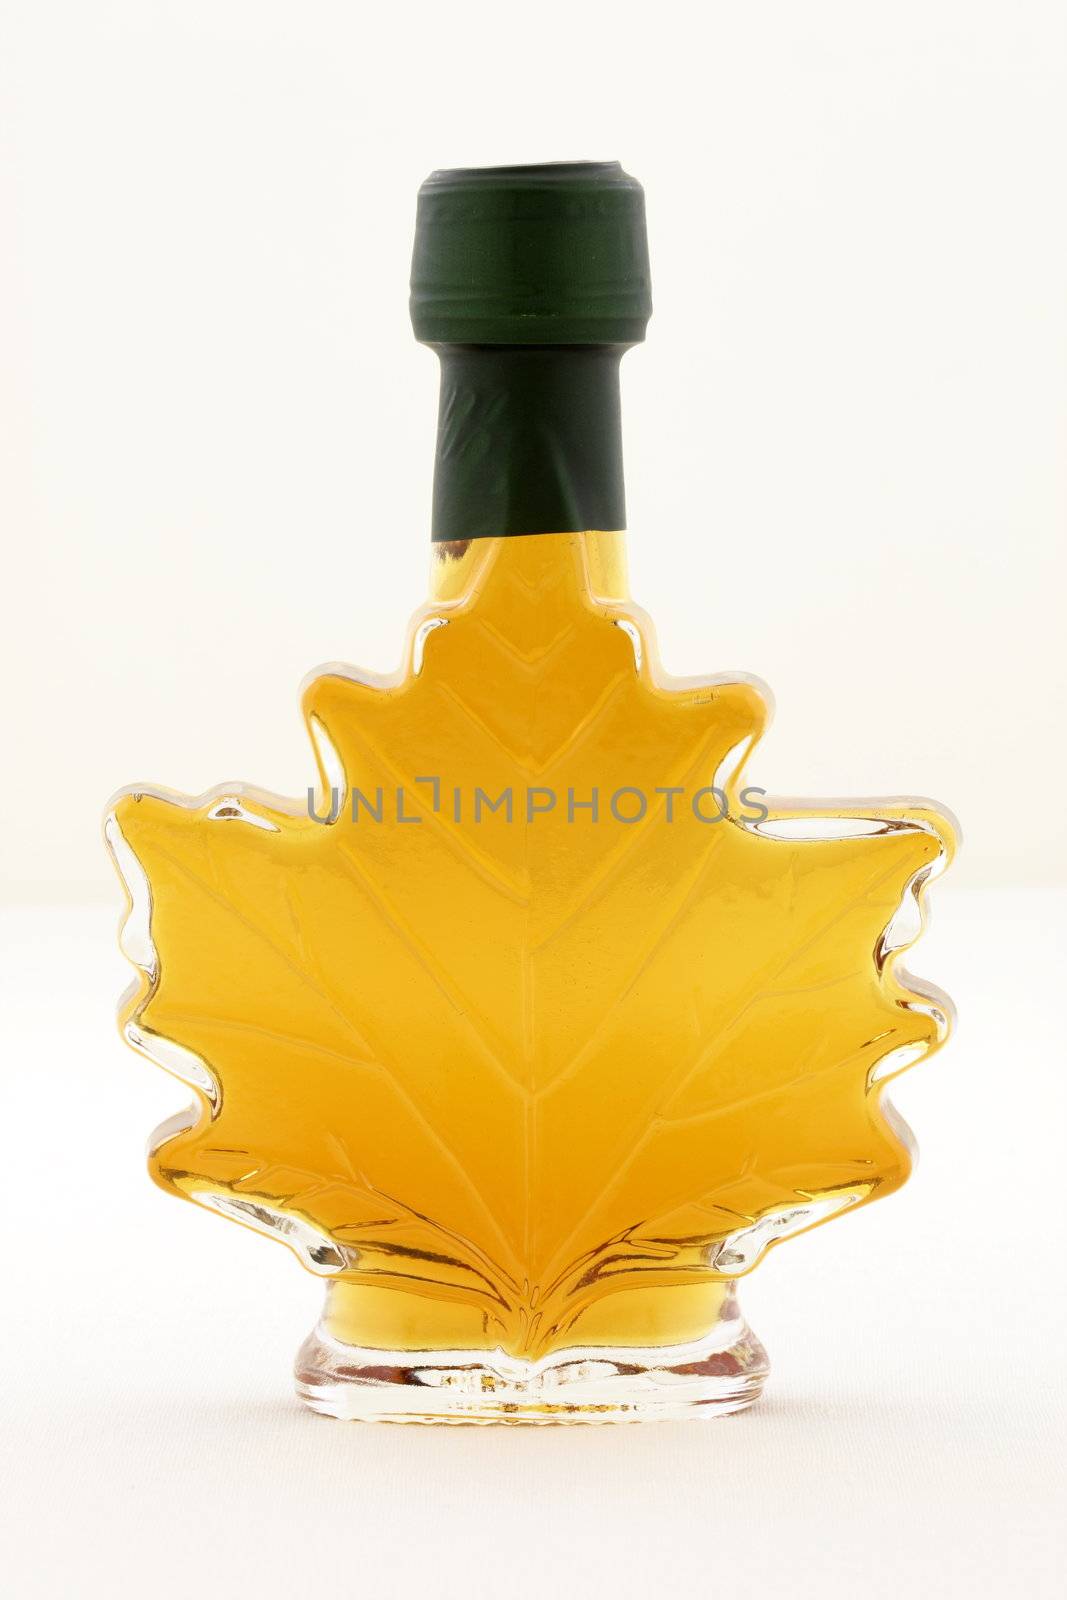 delicious maple syrup made in vermont and canada great over almost any food including the world famous pancakes, waffles and also lots of baked goods.